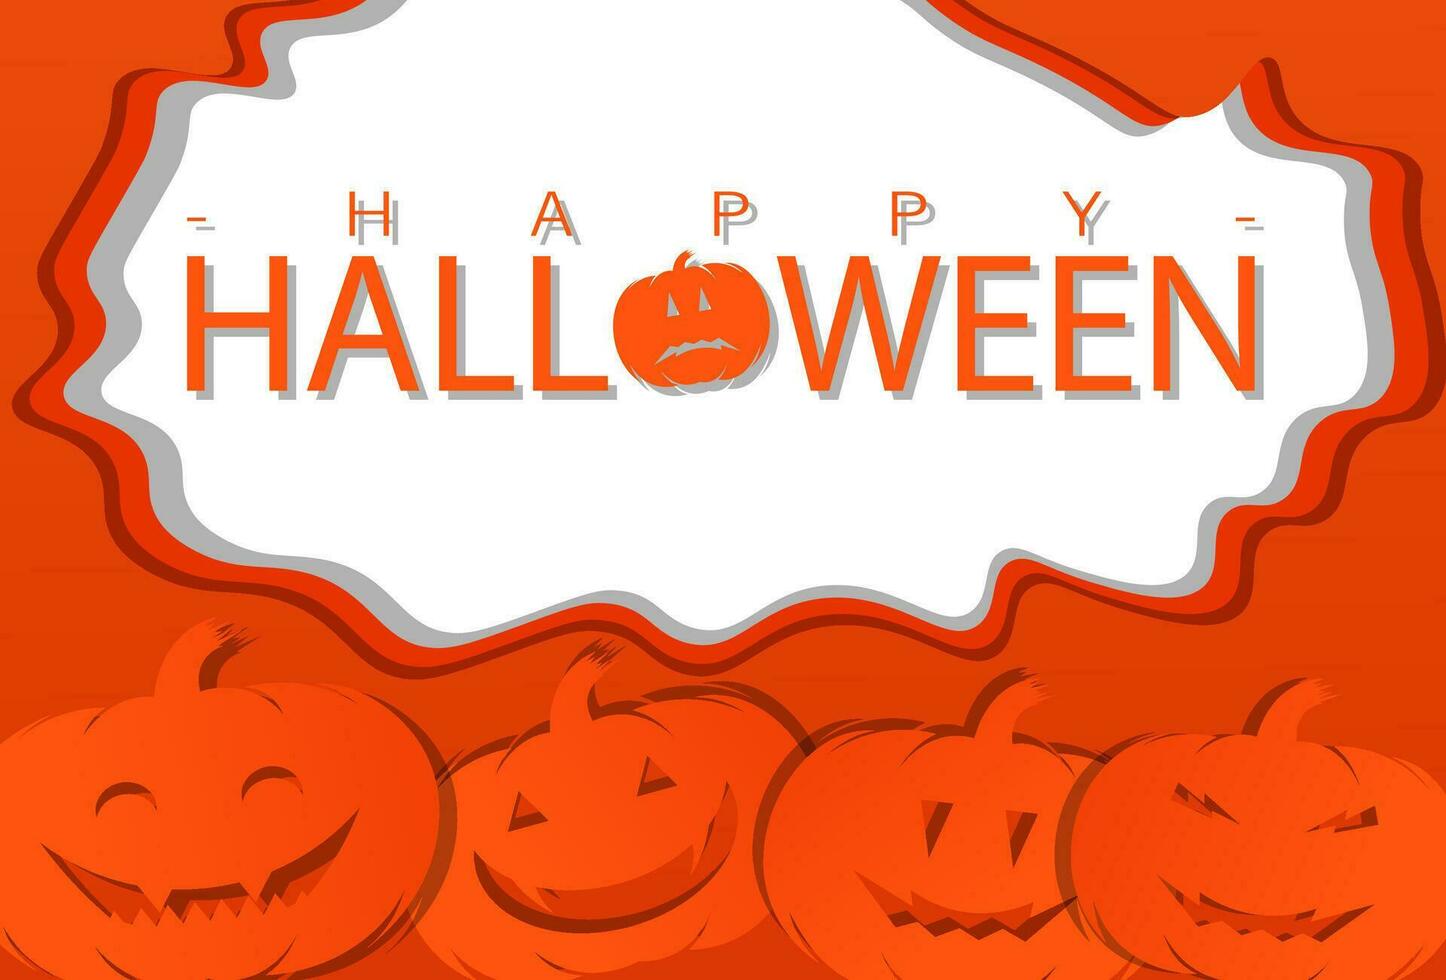 Halloween greeting design with paper cut, orange and white vector